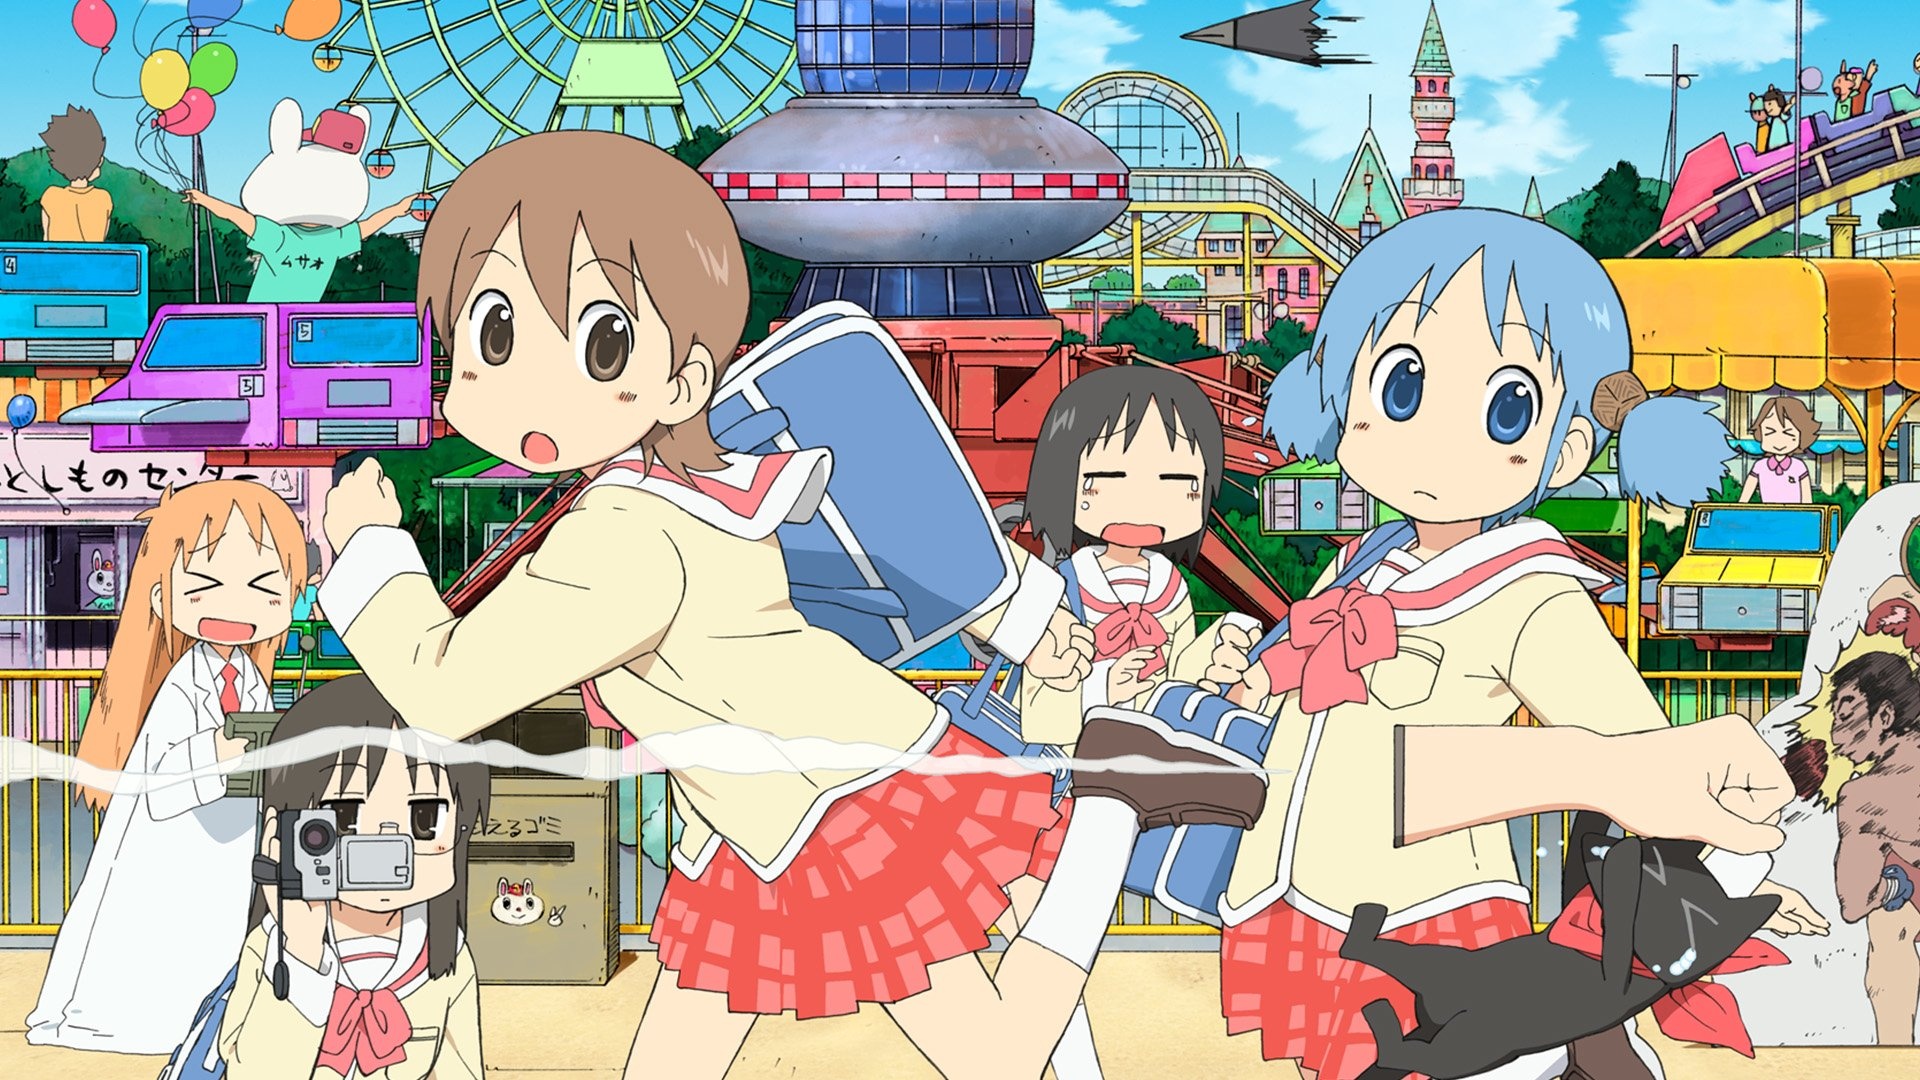 My Ordinary Life Anime, Slice of life, School comedy, Daily routines, 1920x1080 Full HD Desktop